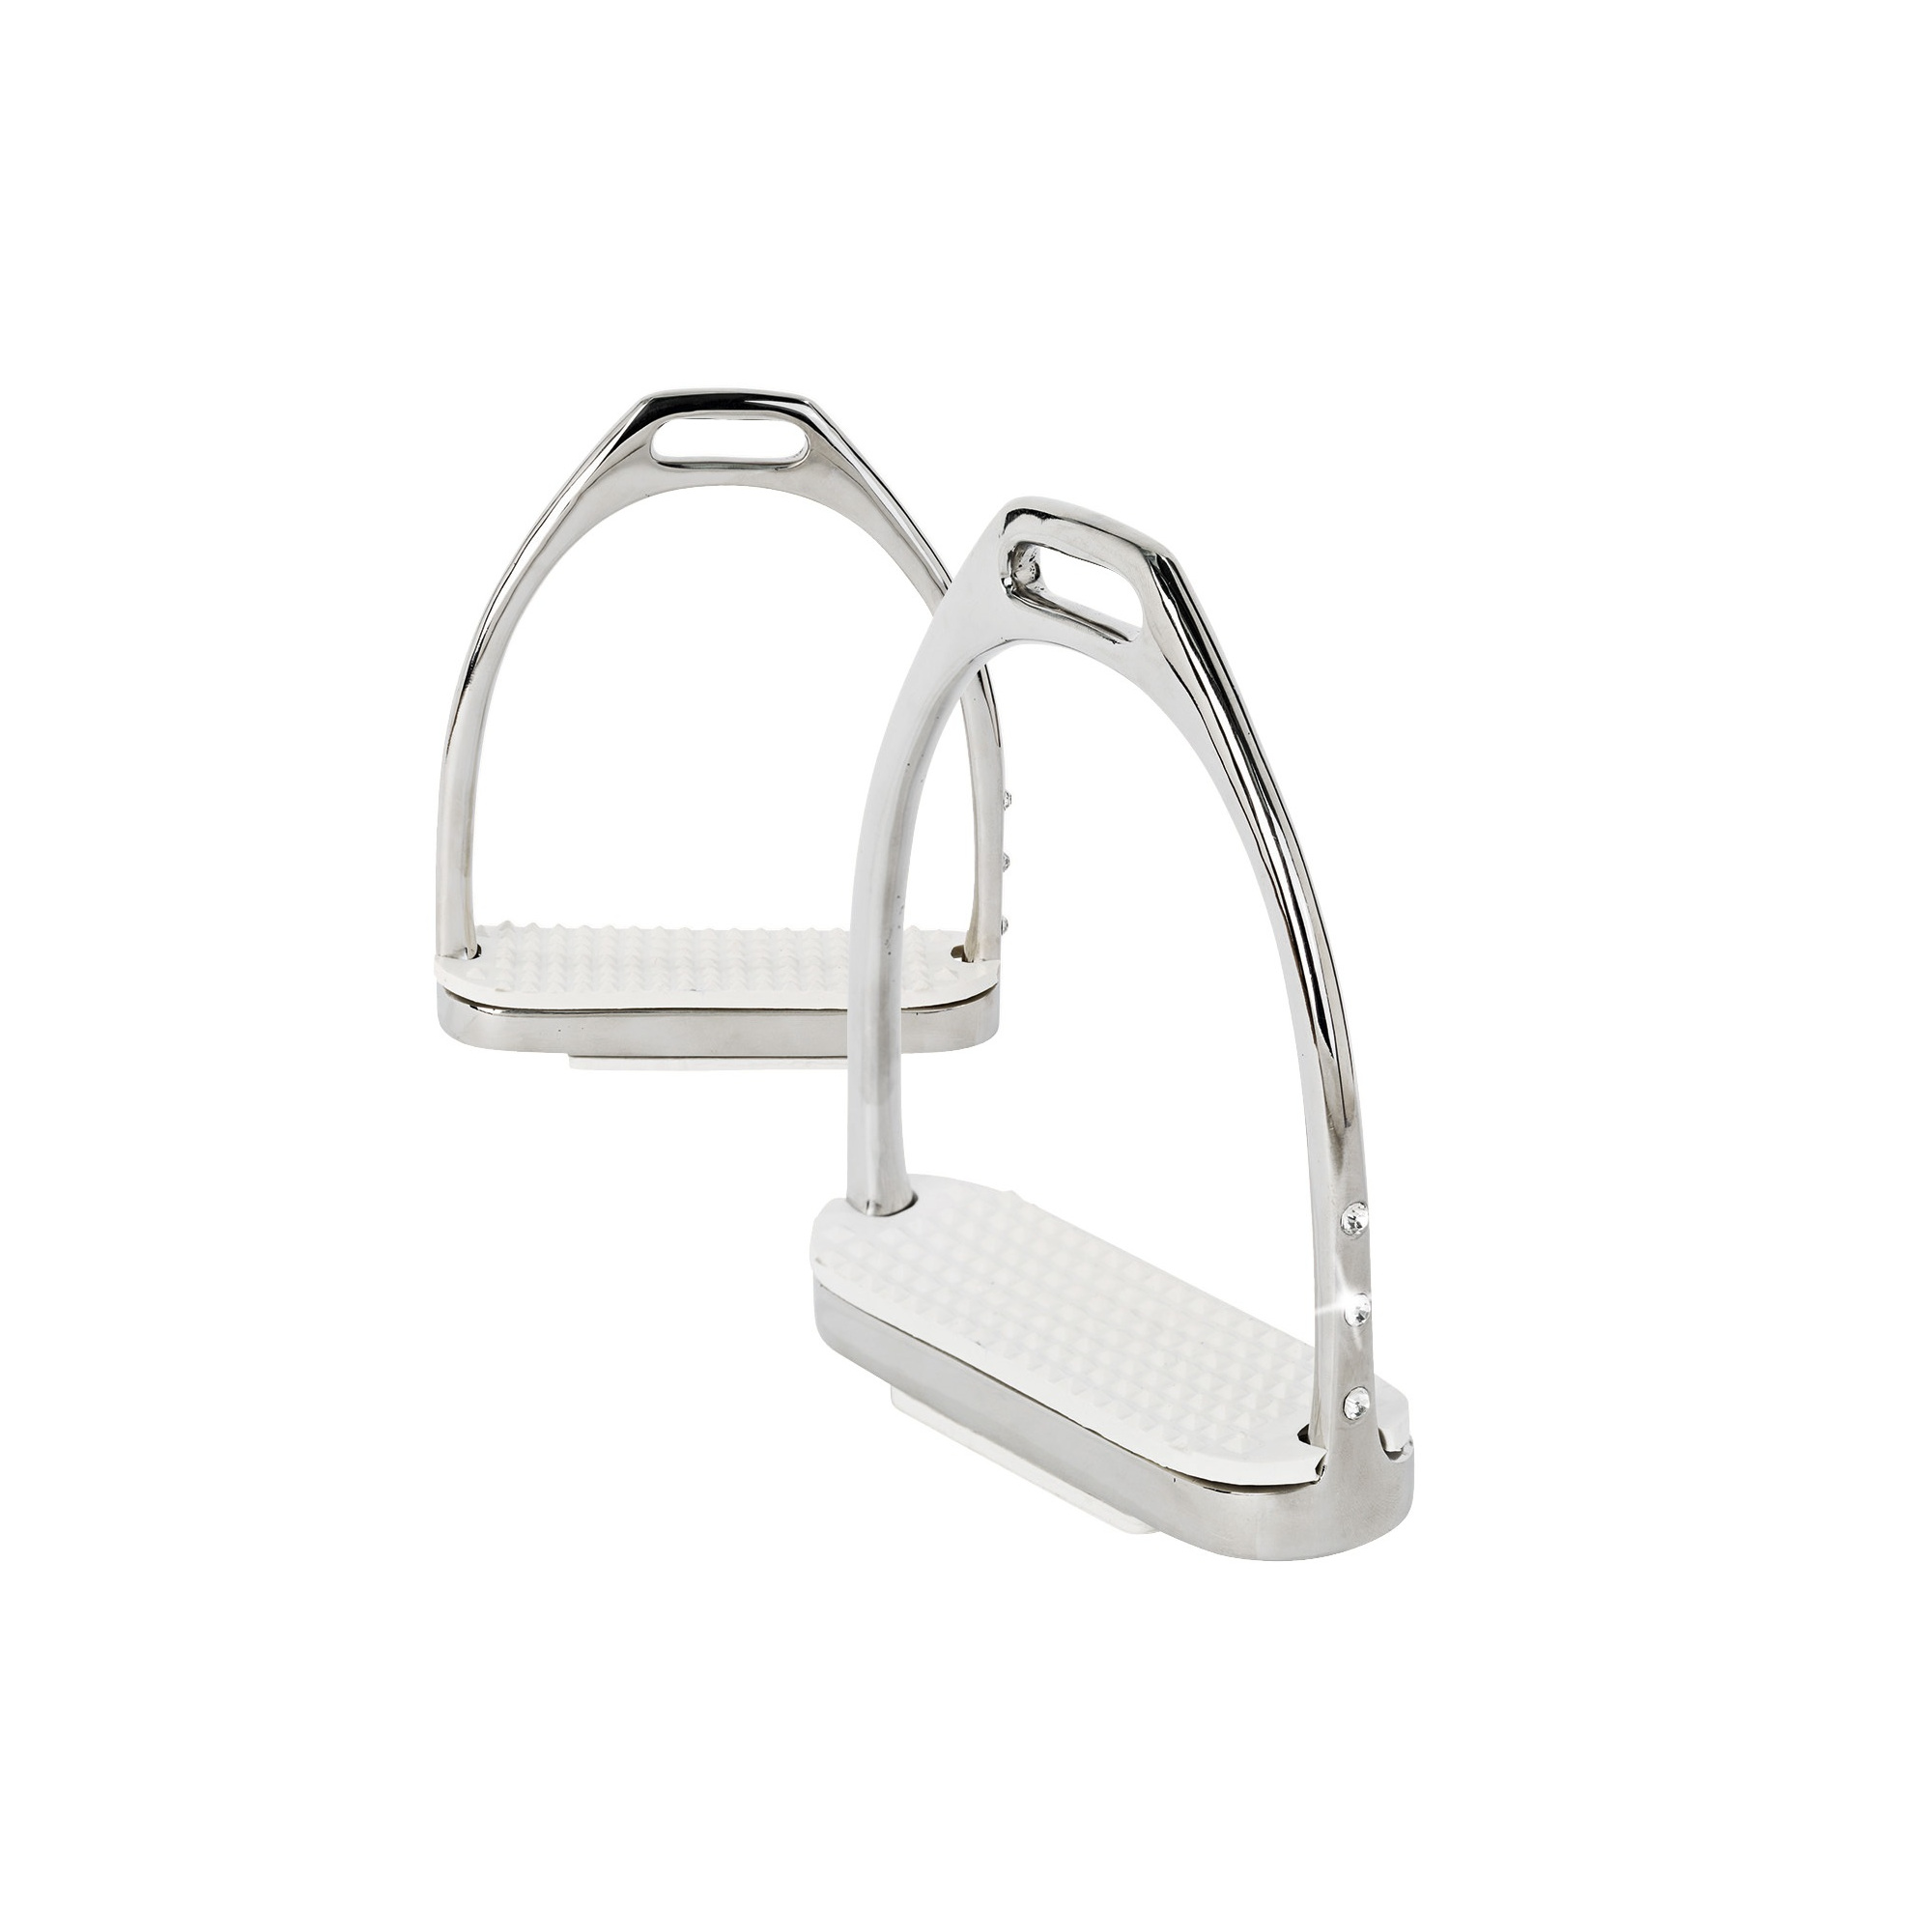 Best On Horse Equestrian Riding Womens Apna Faux Crystal Detailing Stirrups